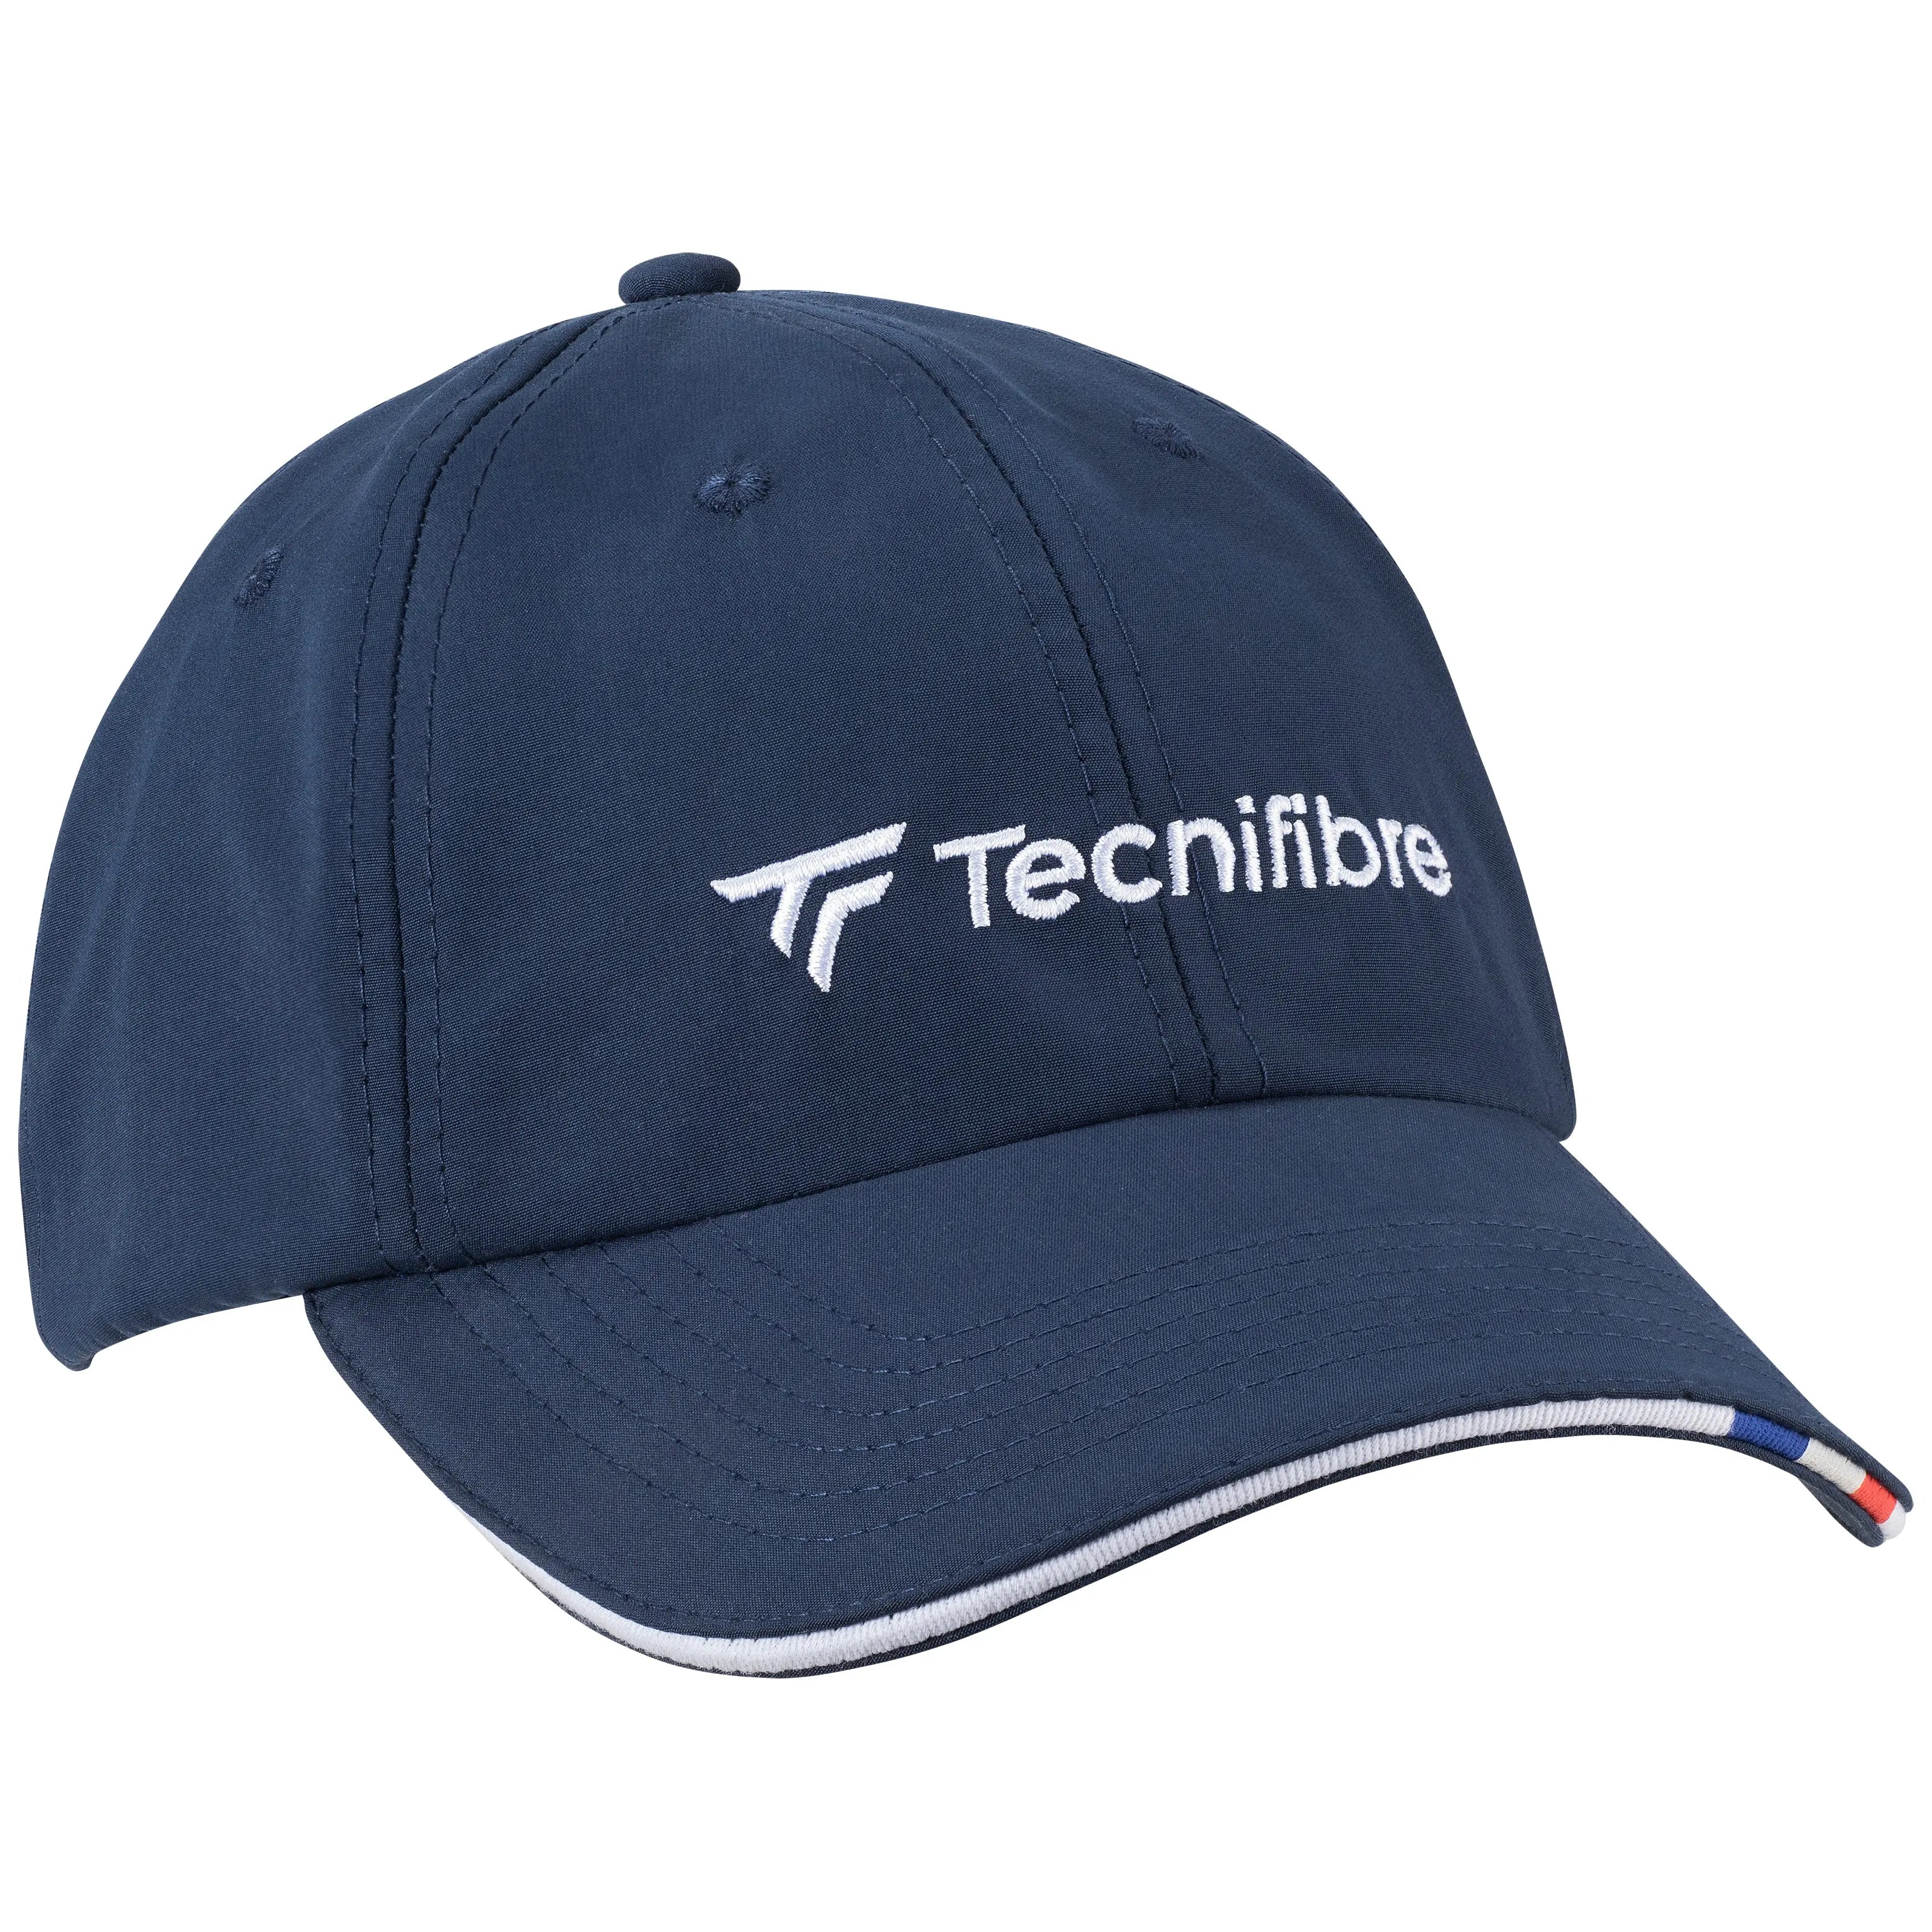 Stylish Tecnifibre Club Cap Marine with embroidered logo available at Racquet Point